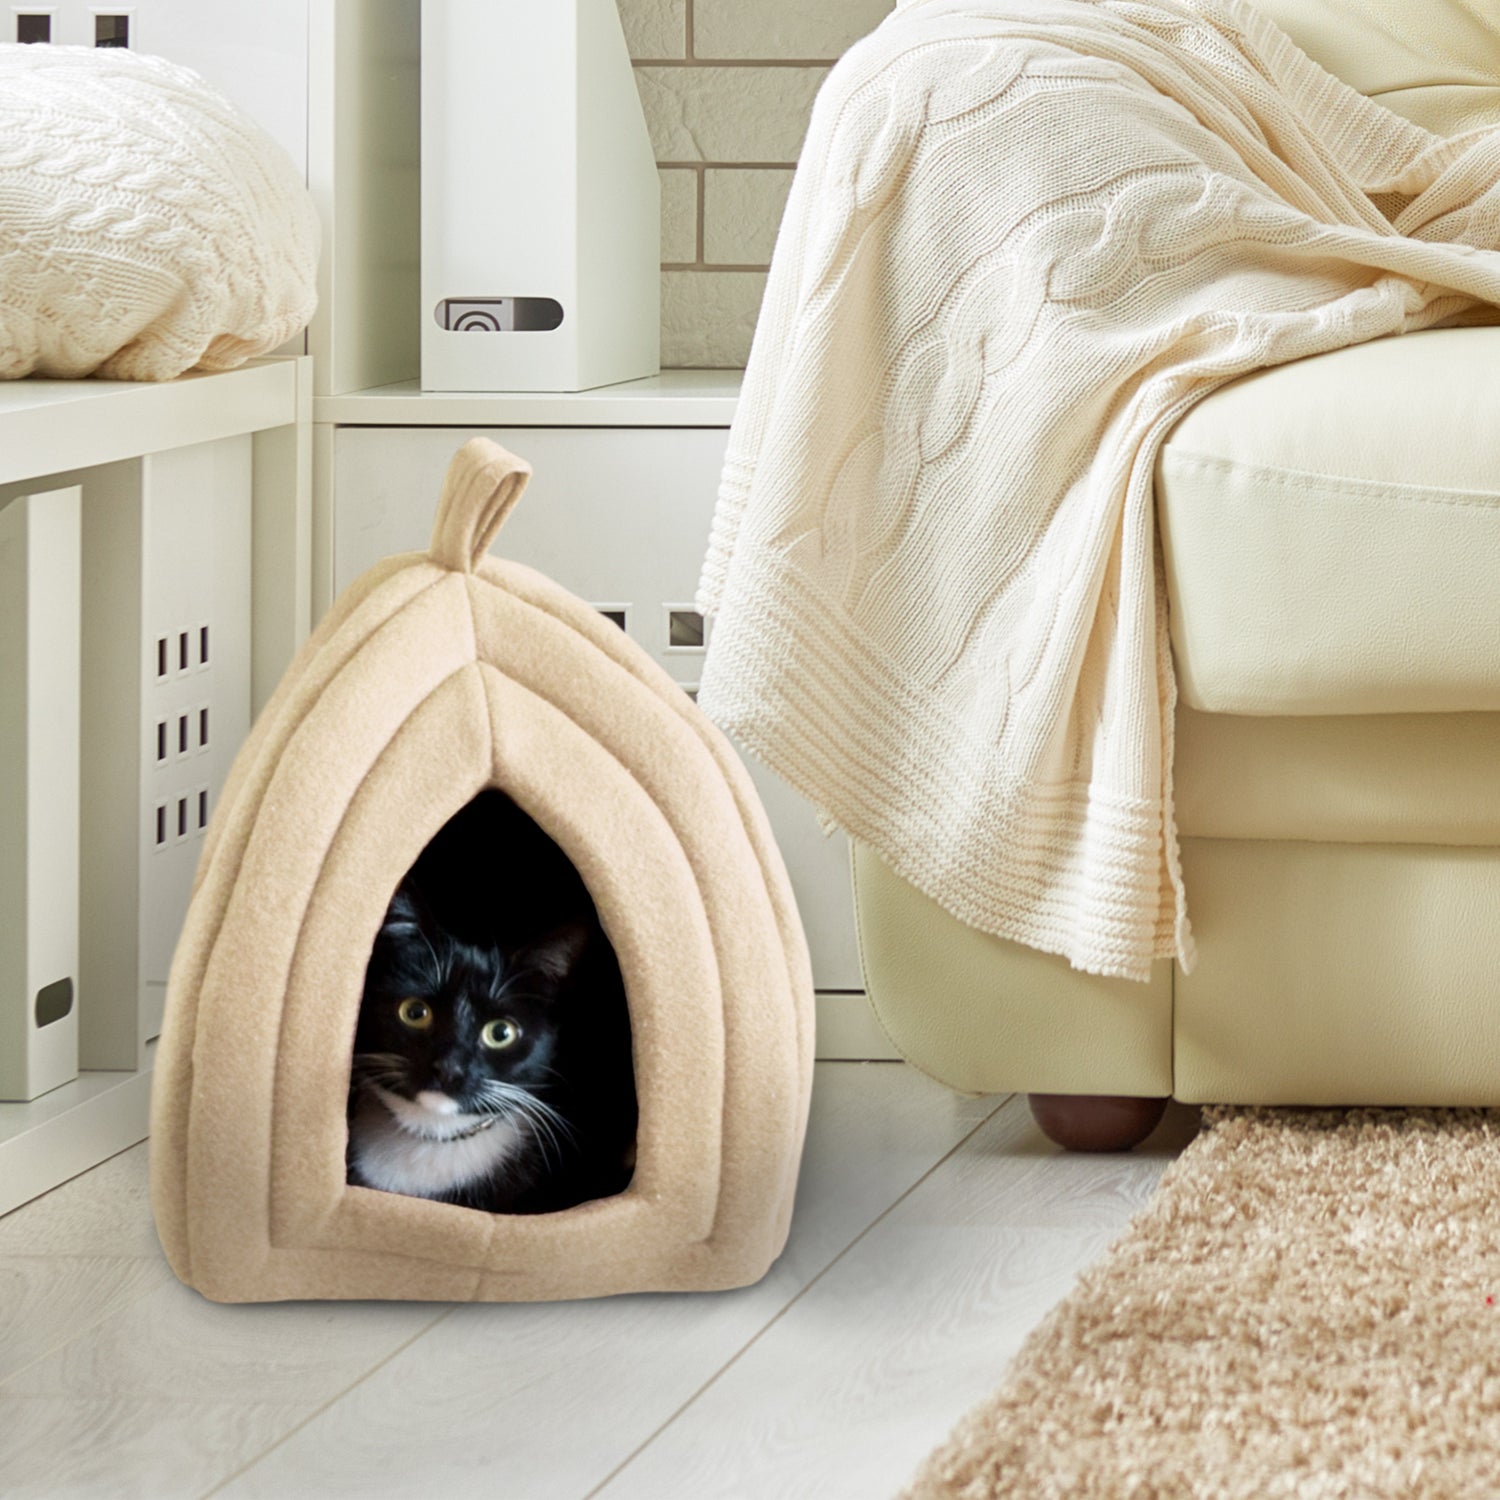 PETMAKER House Beds for Indoor Cats with Removable Foam Cushion Pet Tent for Kittens or Small Dogs up to 16 Lbs